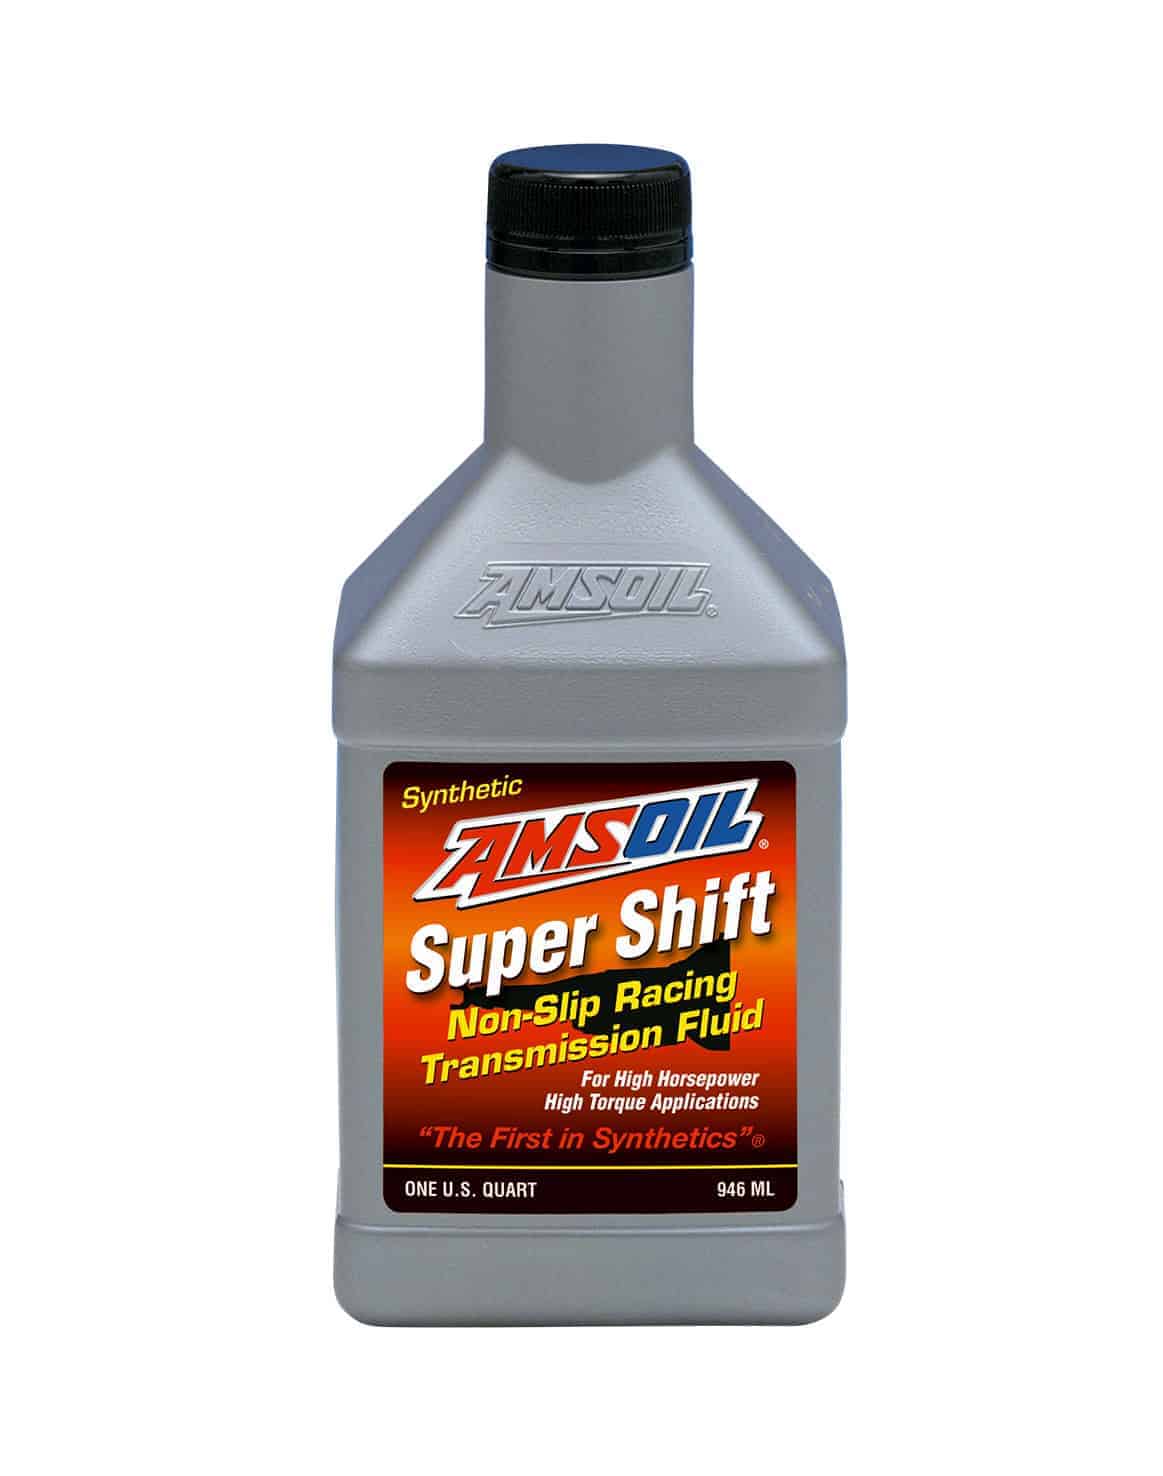 Mixing Amsoil with Mercon LV?